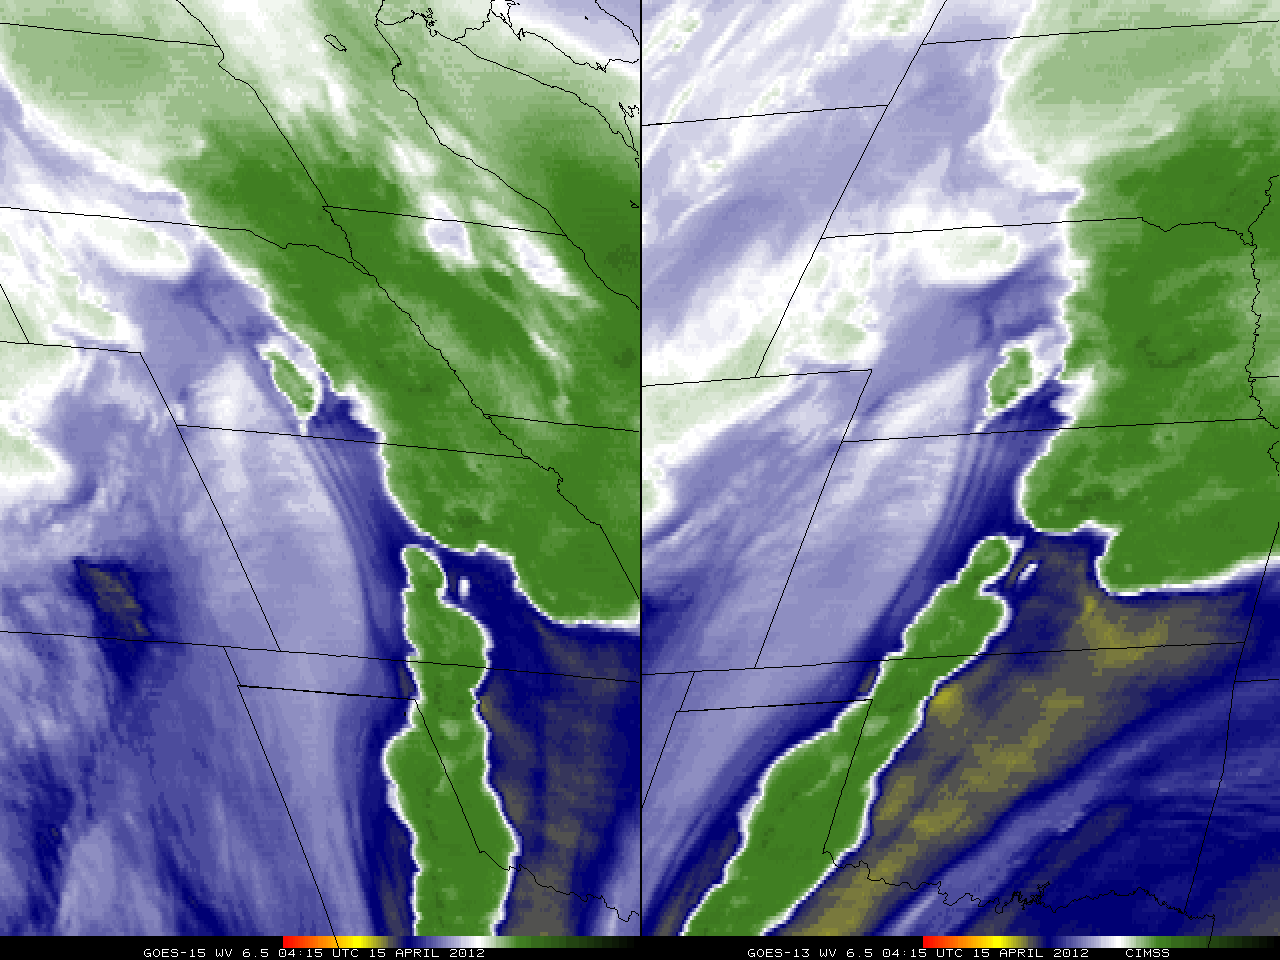 GOES-15 (left) and GOES-13 (right) 6.5 Âµm water vapor channel images (click image to play animation)